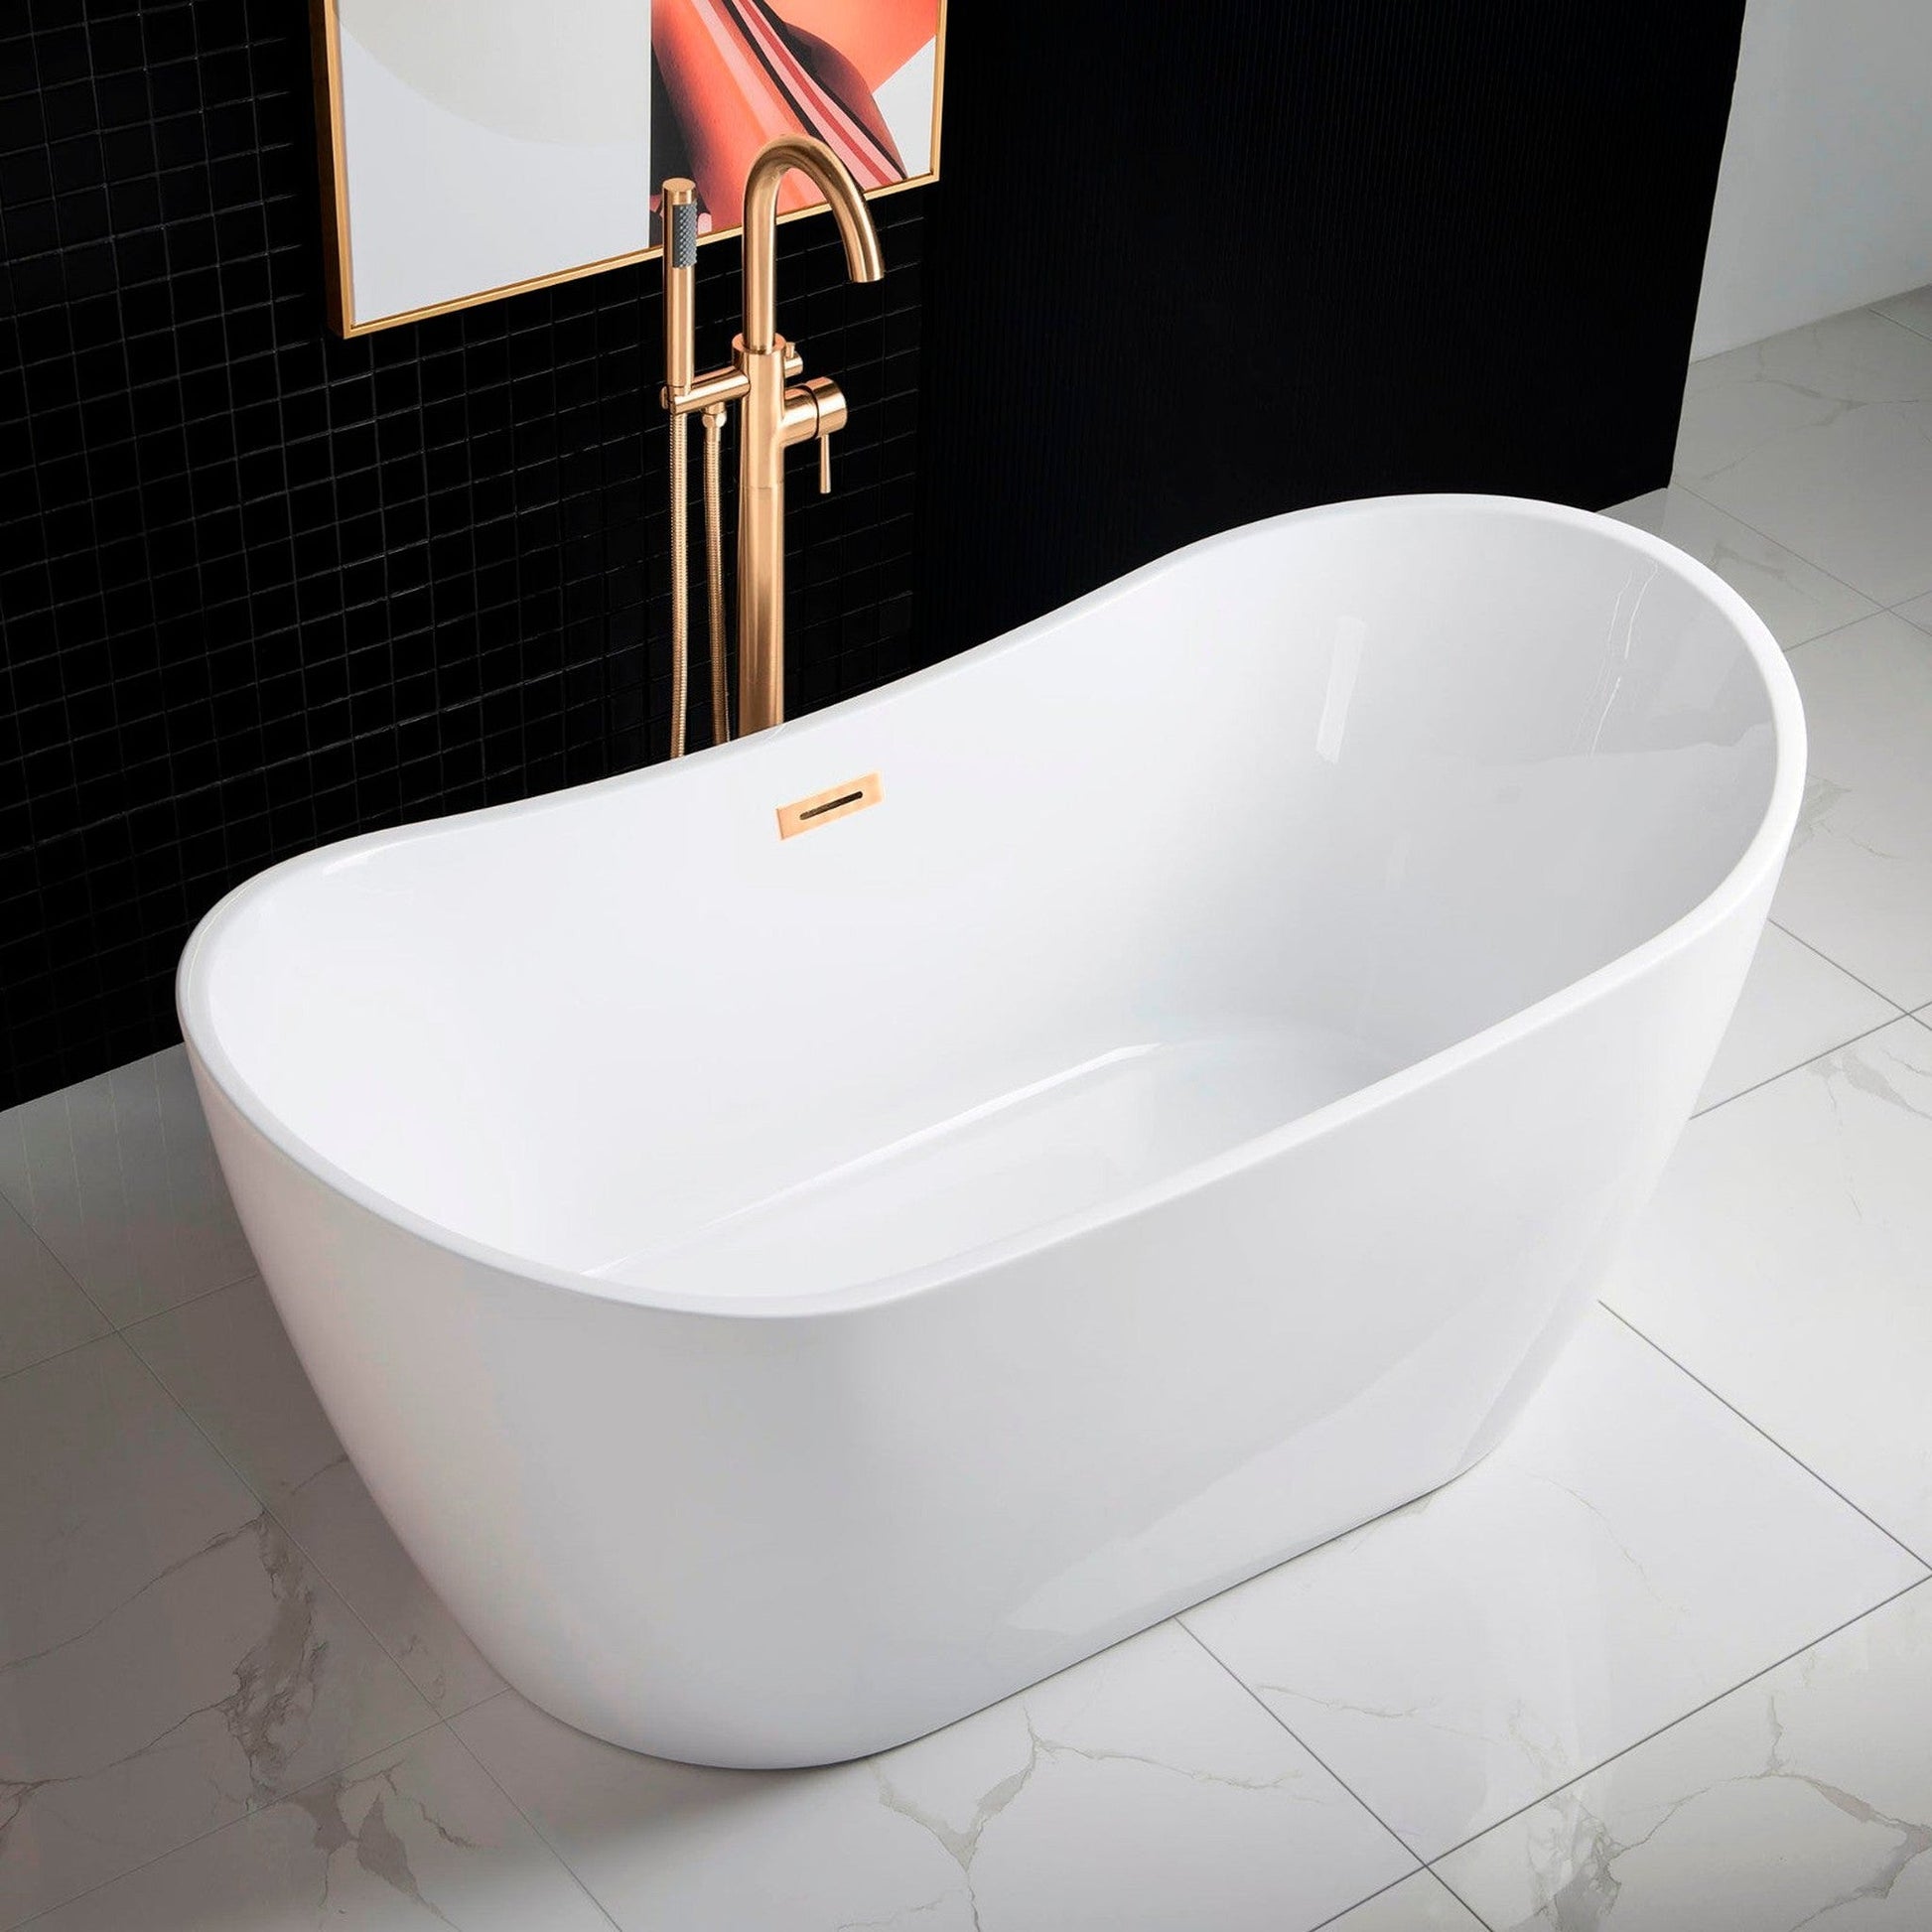 WoodBridge B0016 59" White Acrylic Freestanding Soaking Bathtub With Brushed Gold Drain, Overflow, F0073BGVT Tub Filler and Caddy Tray